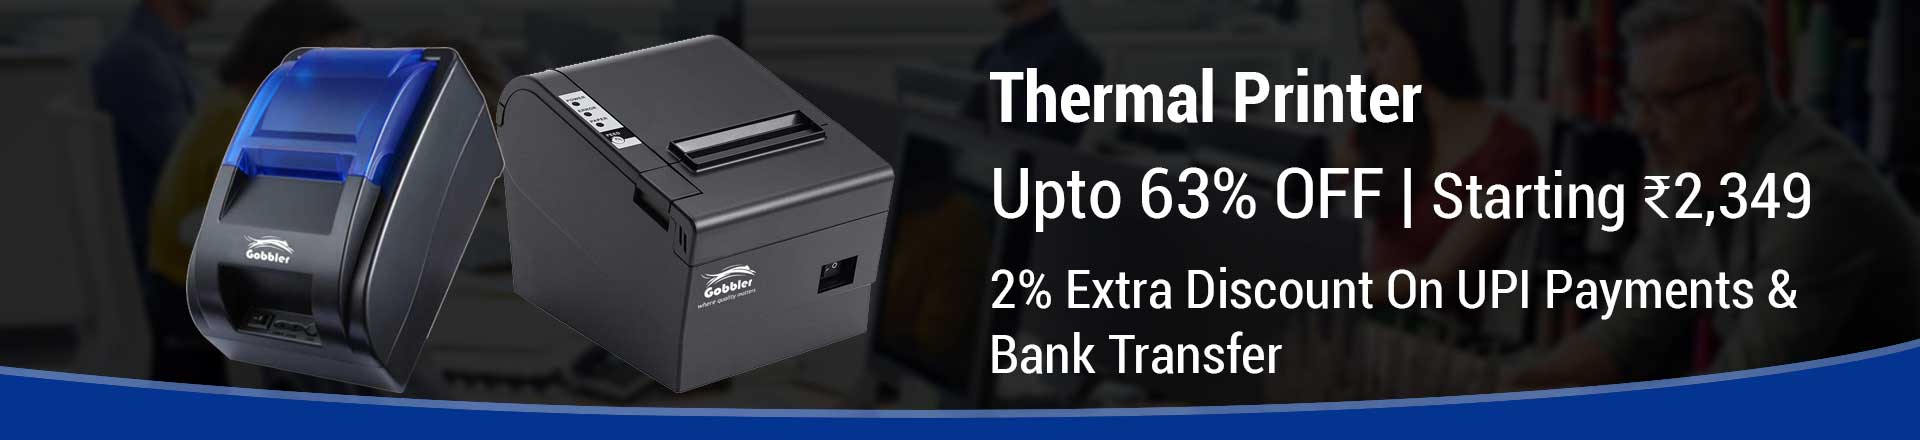 ThermalPrinter-Categorypage-14-08-23